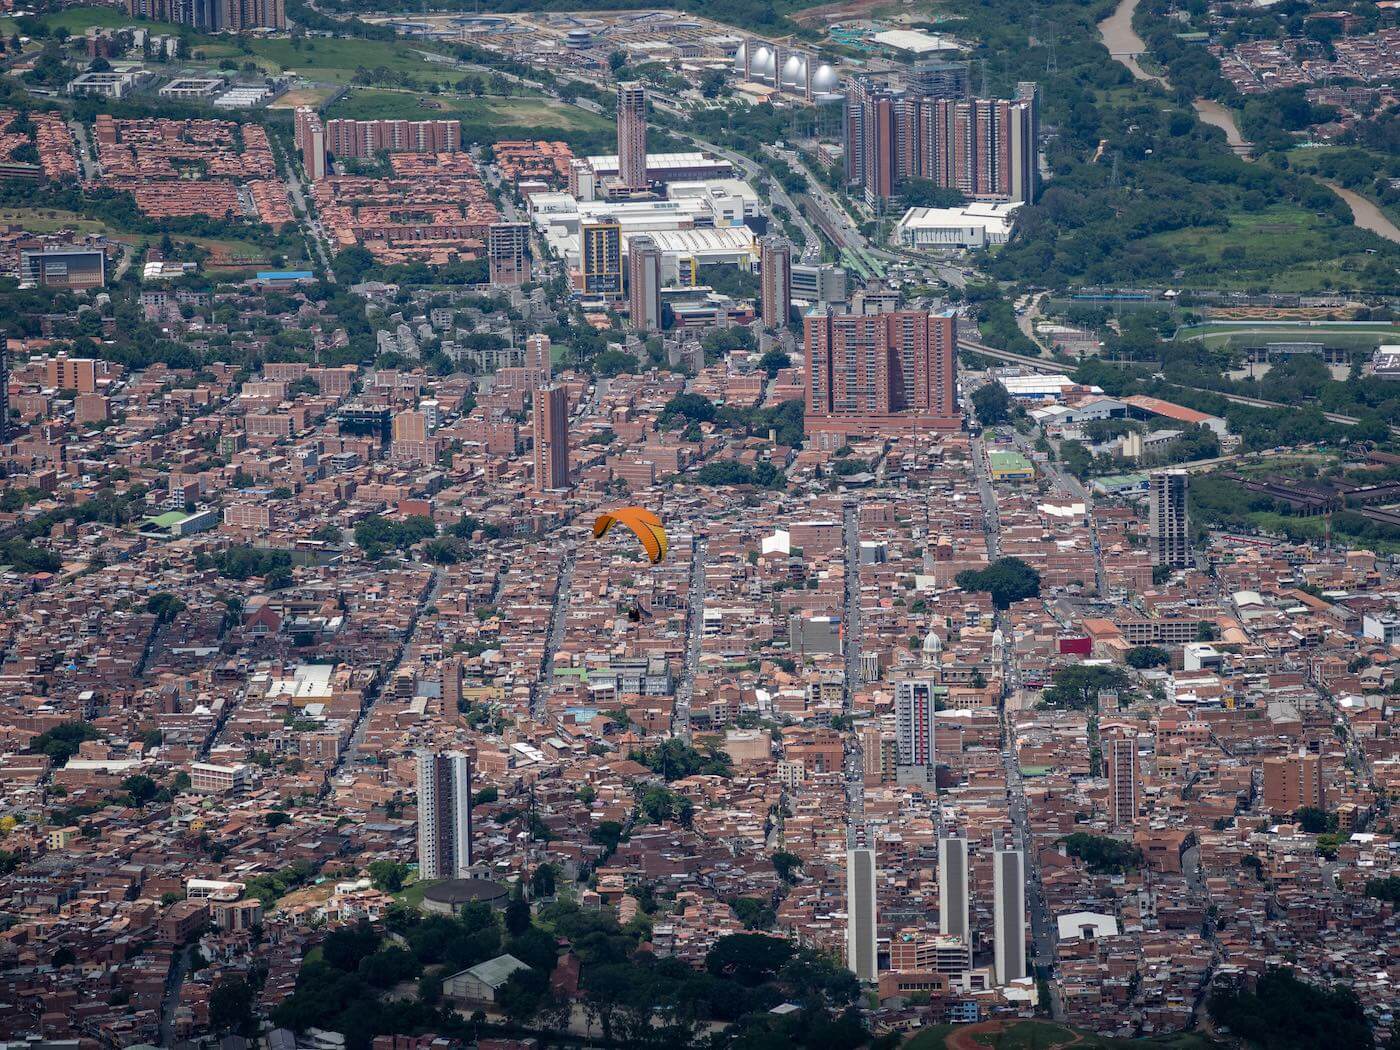 My paraglider with the city of Medellin below